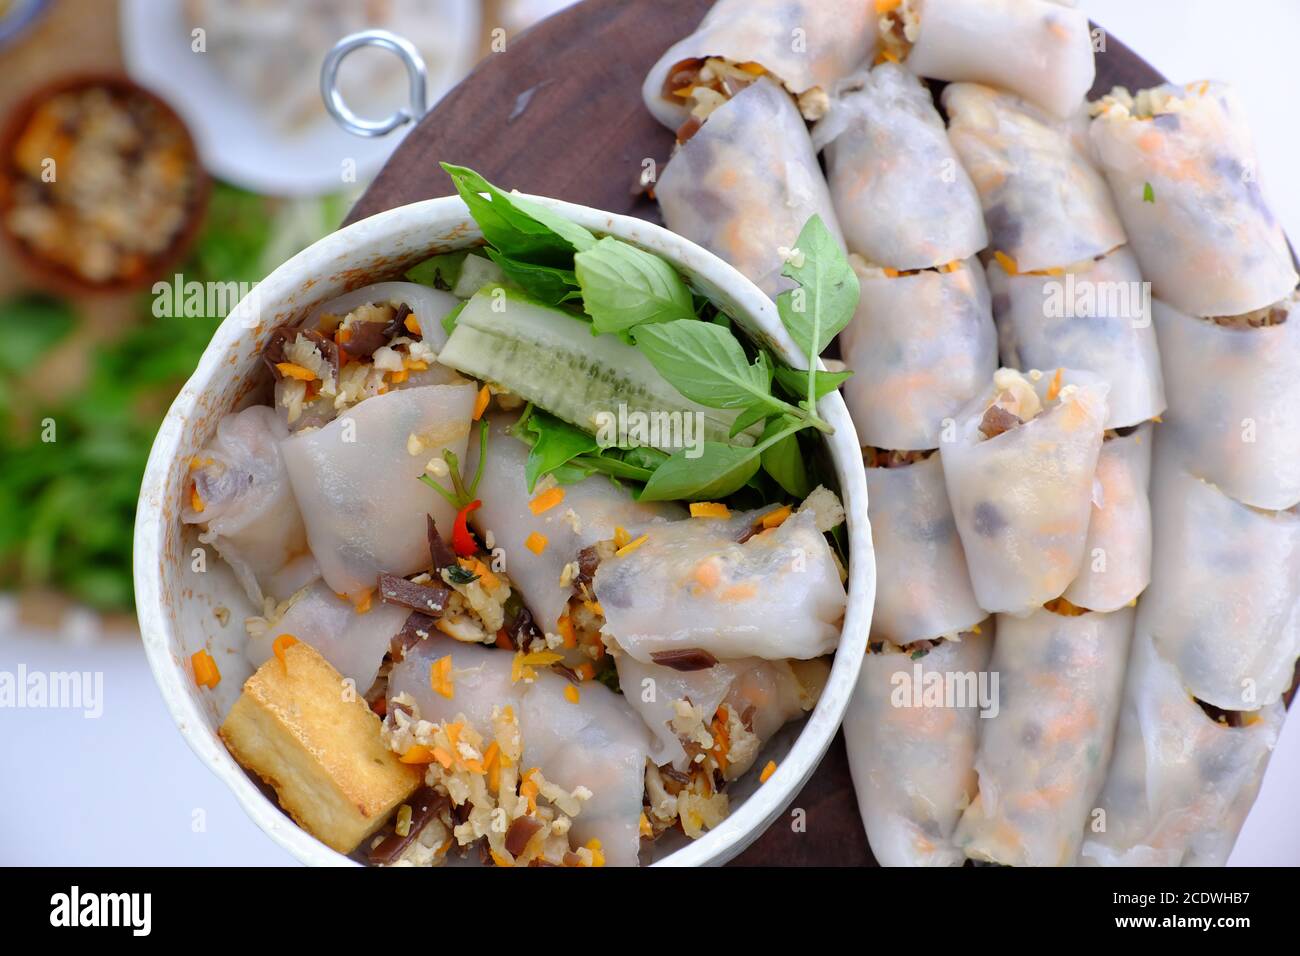 Top view people have breakfast with homemade vegan Vietnamese rice noodles roll, close up hand hold bowl of stuffed pancake dish on food background Stock Photo